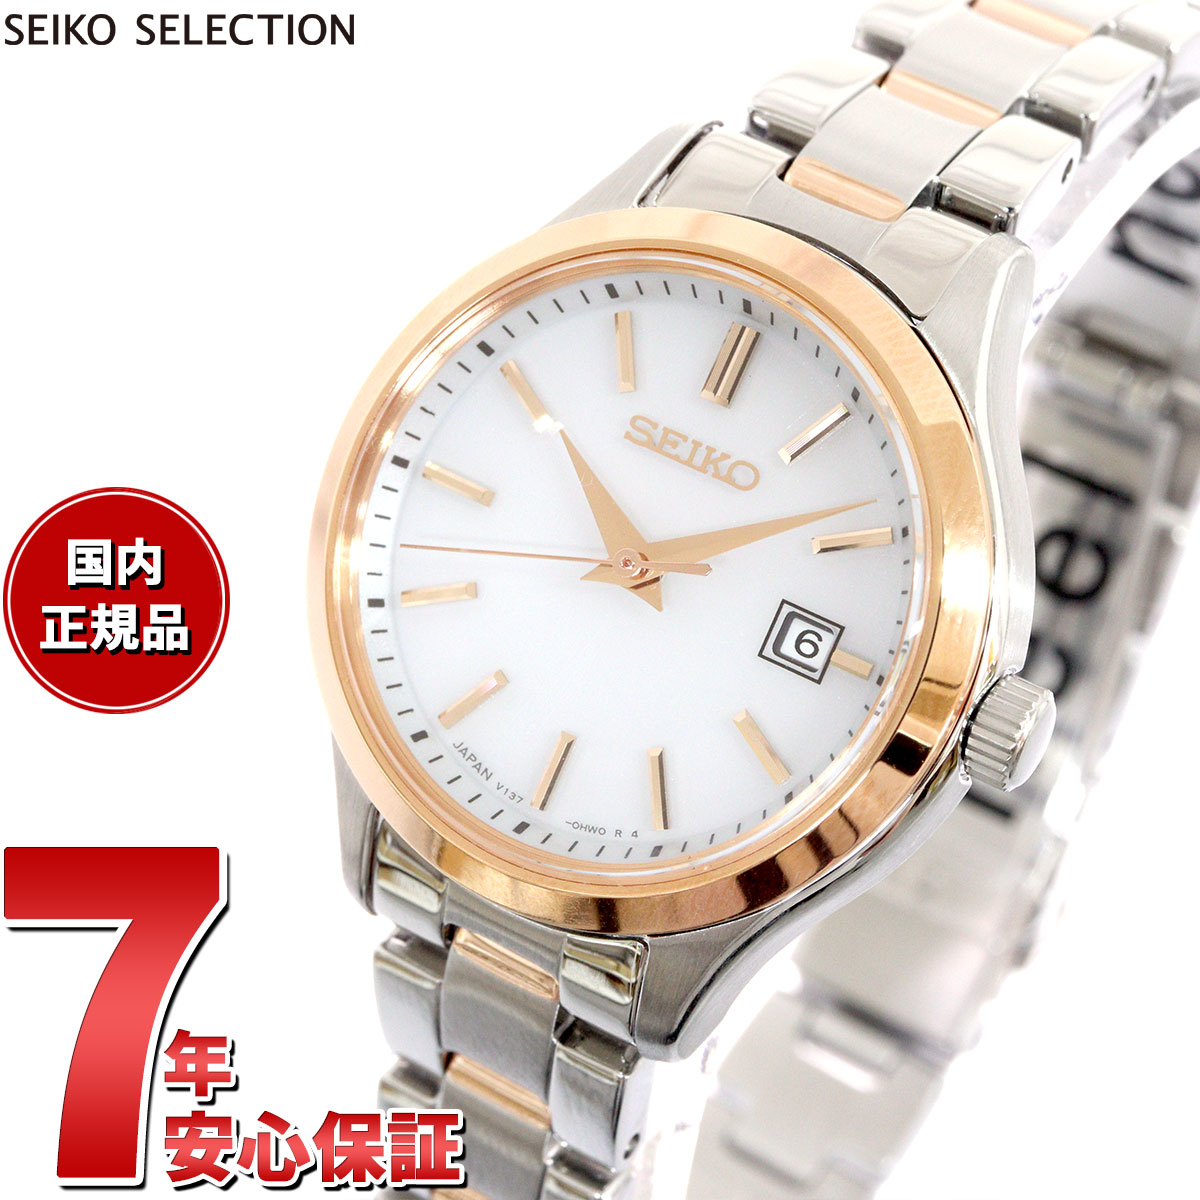 Seiko Selection SEIKO SELECTION S Series Shop Exclusive Distribution  Limited Model Solar Watch Ladies Pair STPX096 [2022 New] | WatchCharts